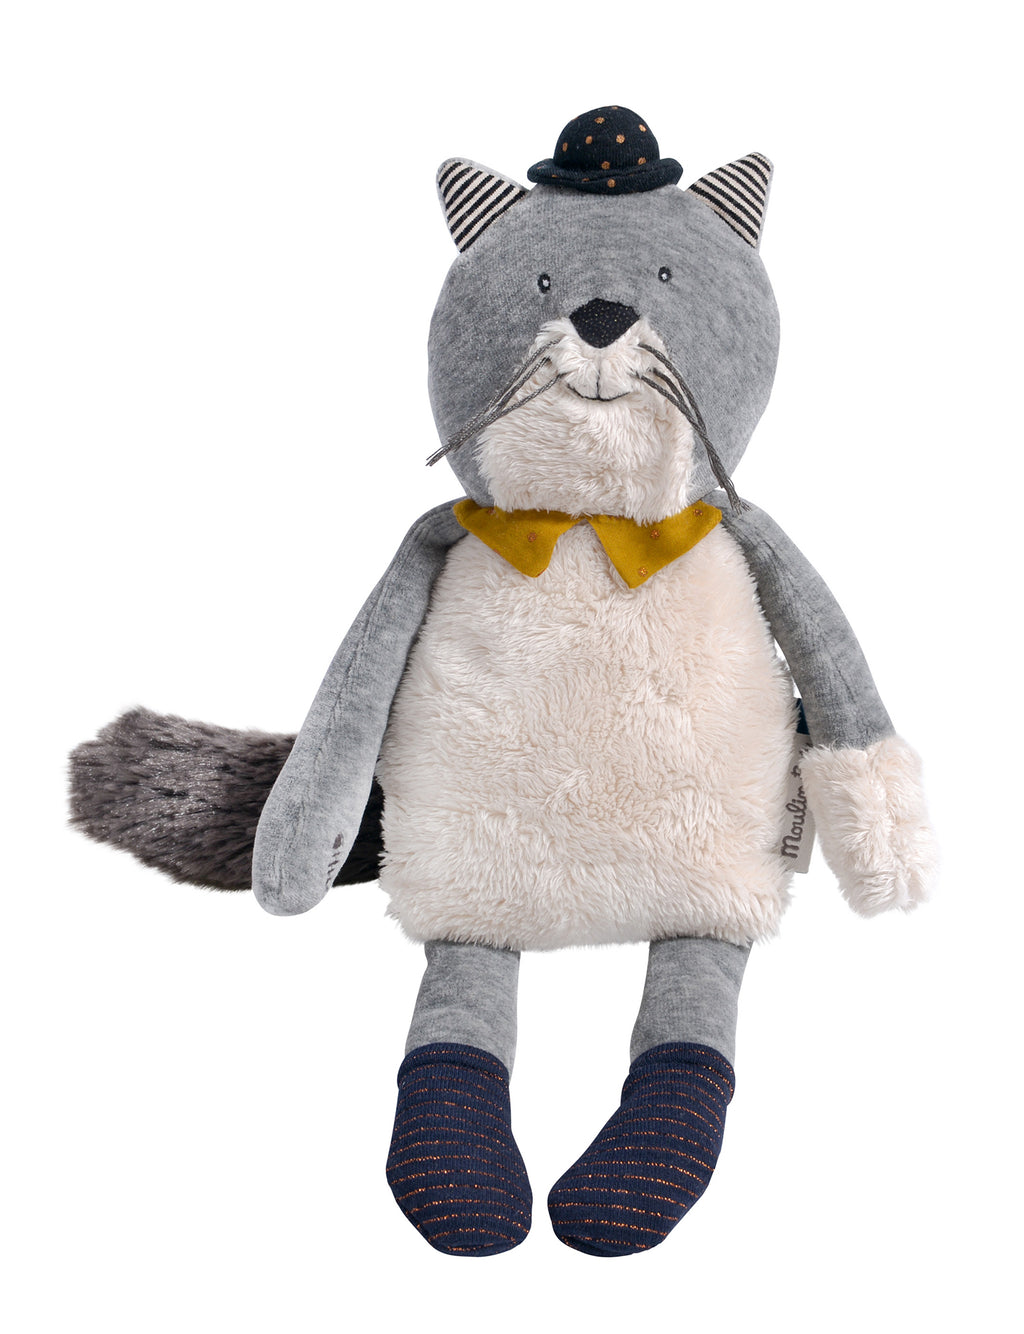 This 31 cm plush toy features Fernand wearing a bowler hat and a yellow bow tie.